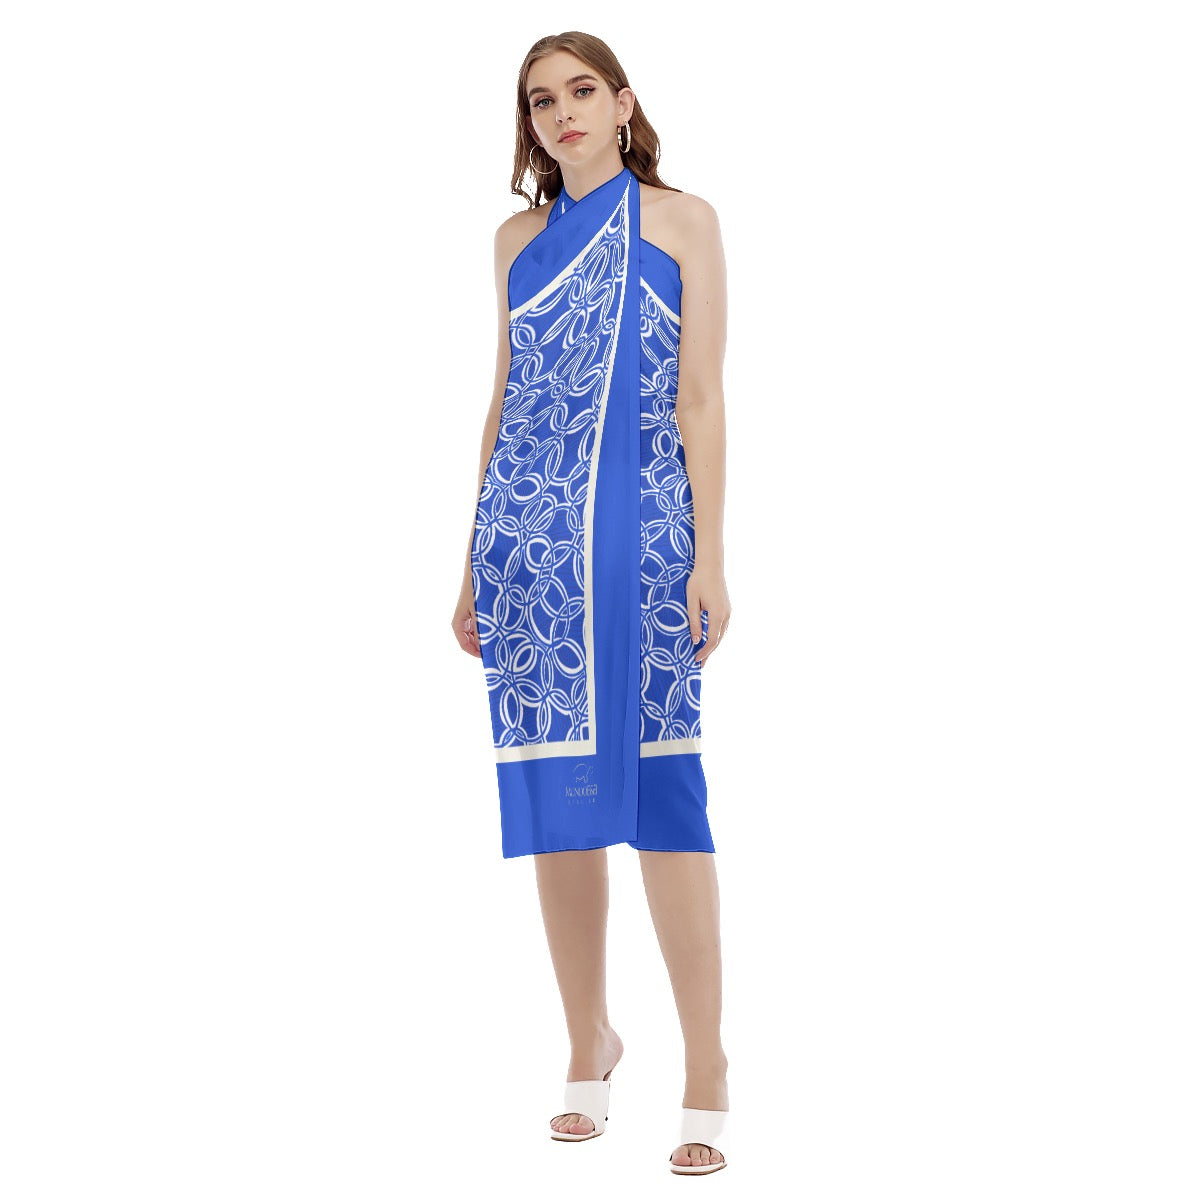 Geometric Blue/White Women's Beach Dress. Cover up. Design hand-painted by the Designer Maria Alejan